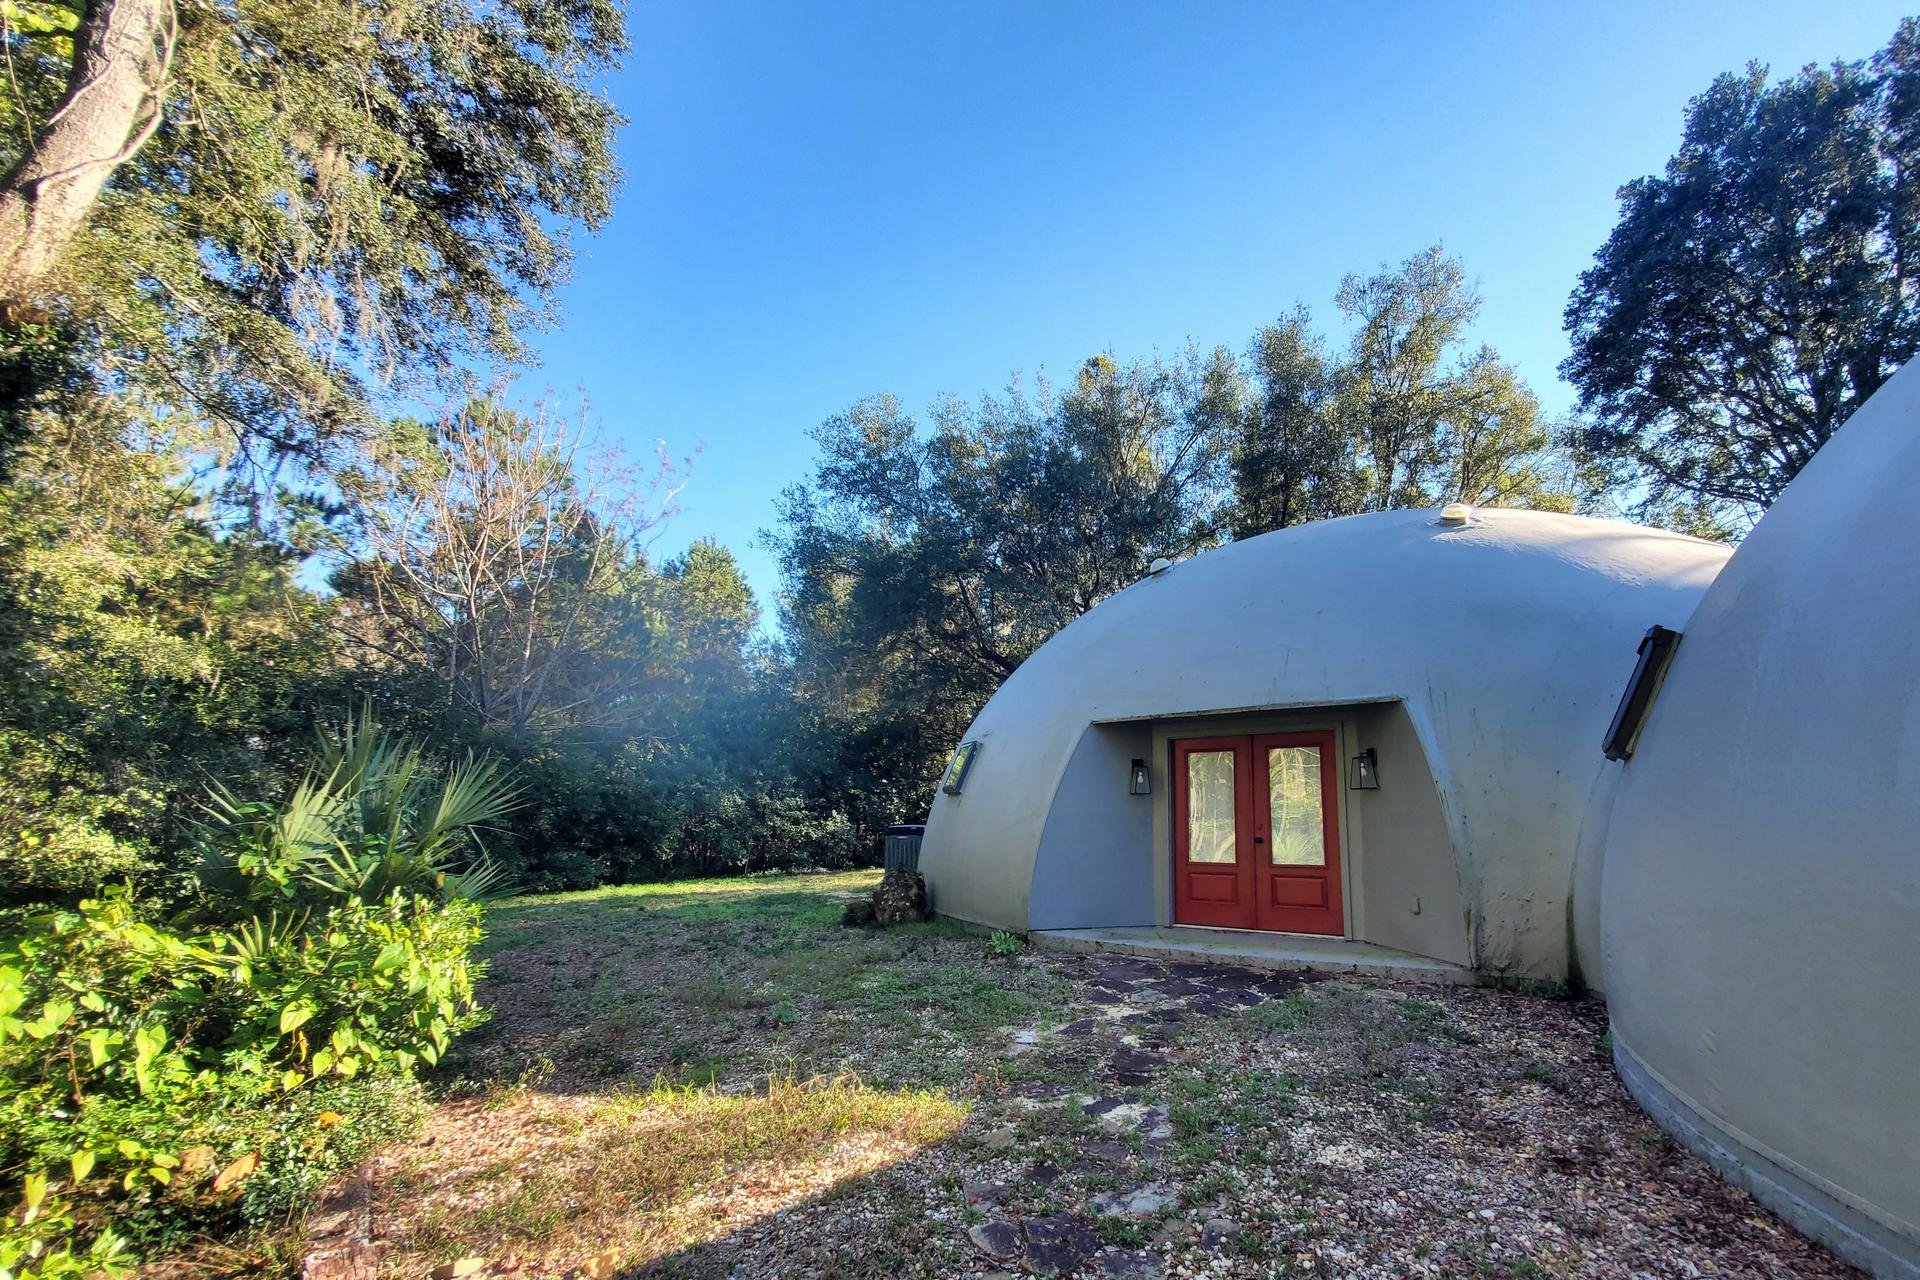 Dome Home on 1.6 Acre Property.